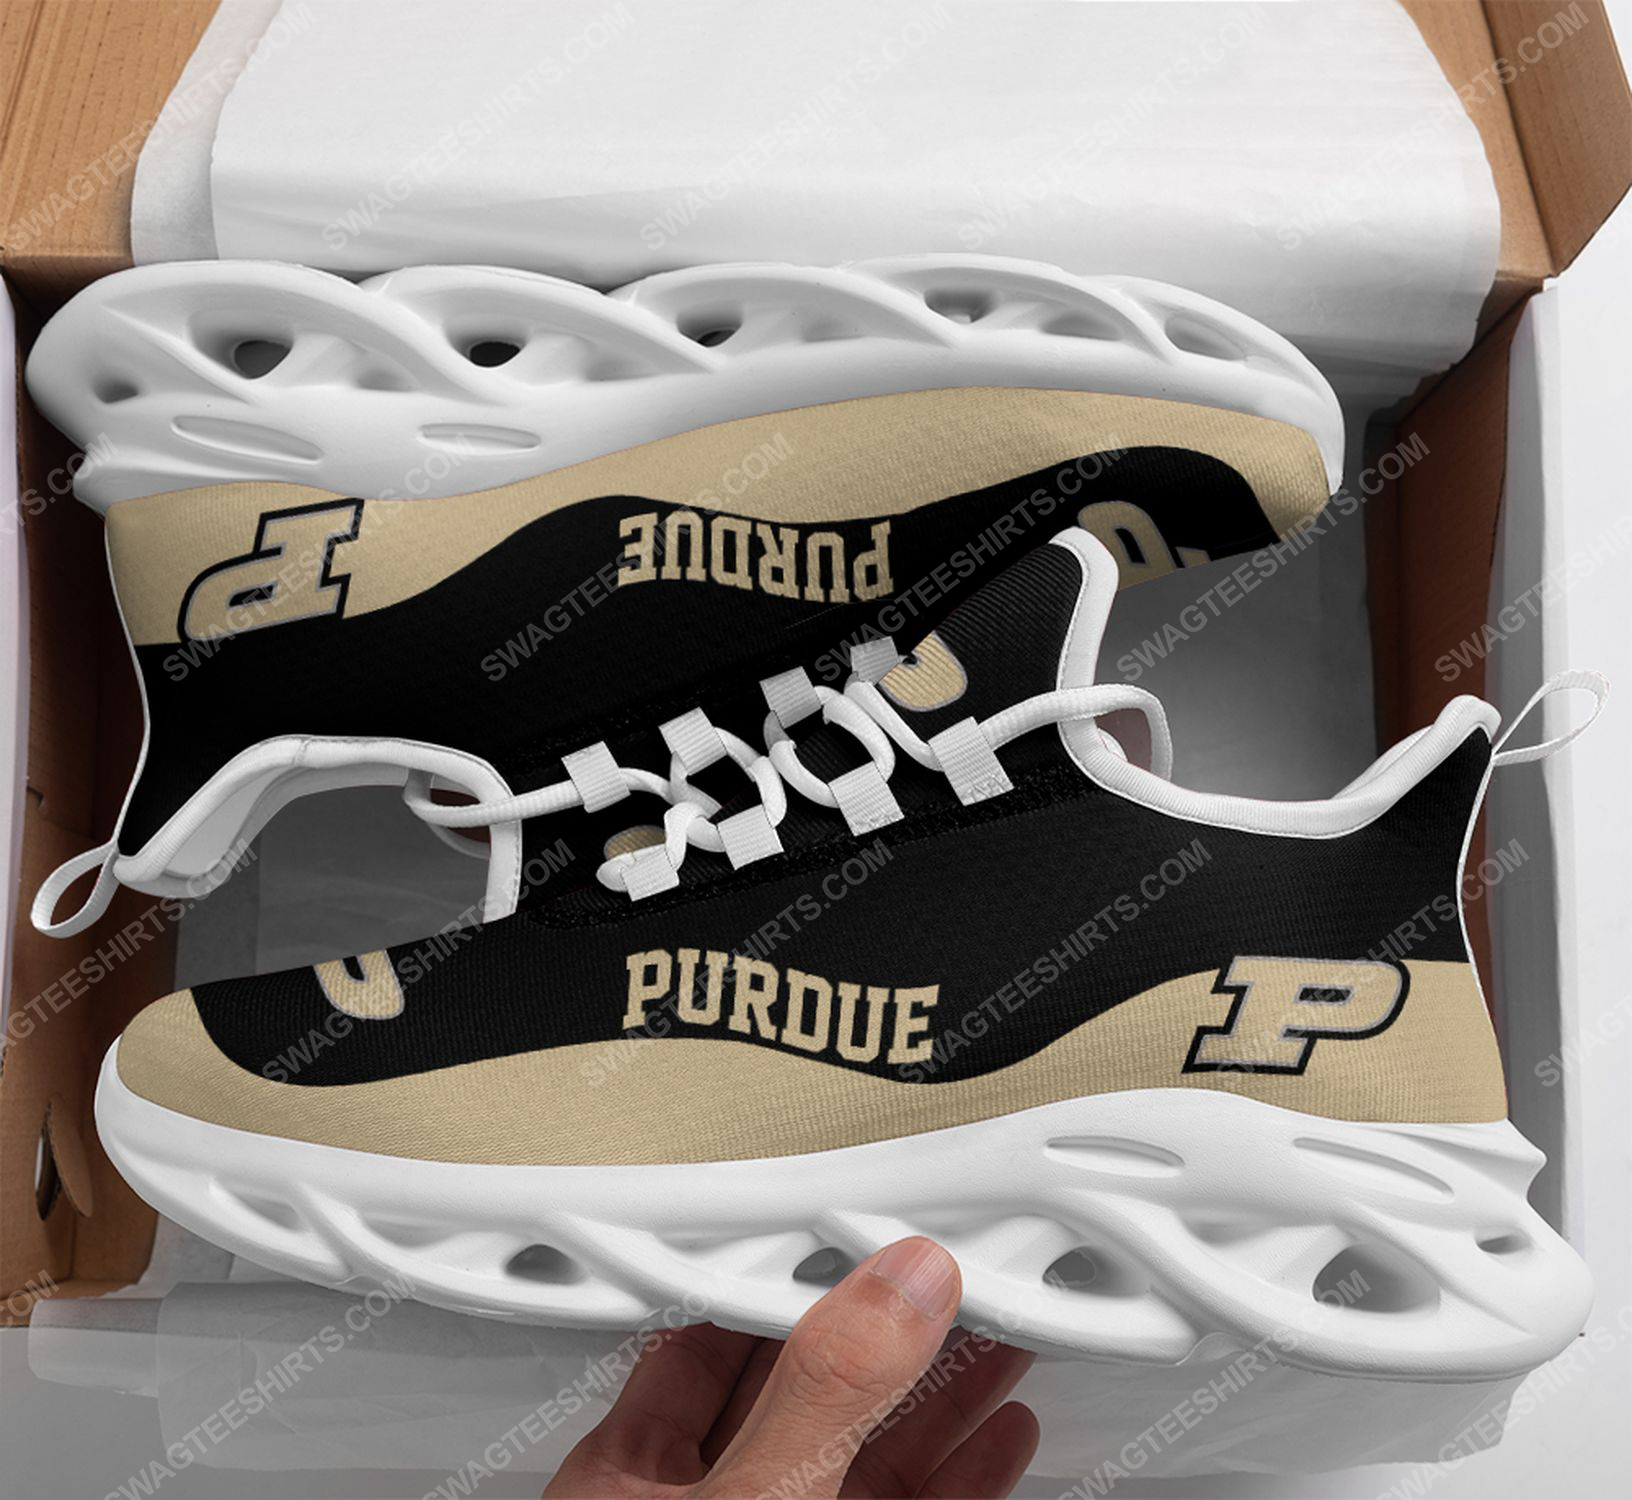 The purdue boilermakers football team max soul shoes 1